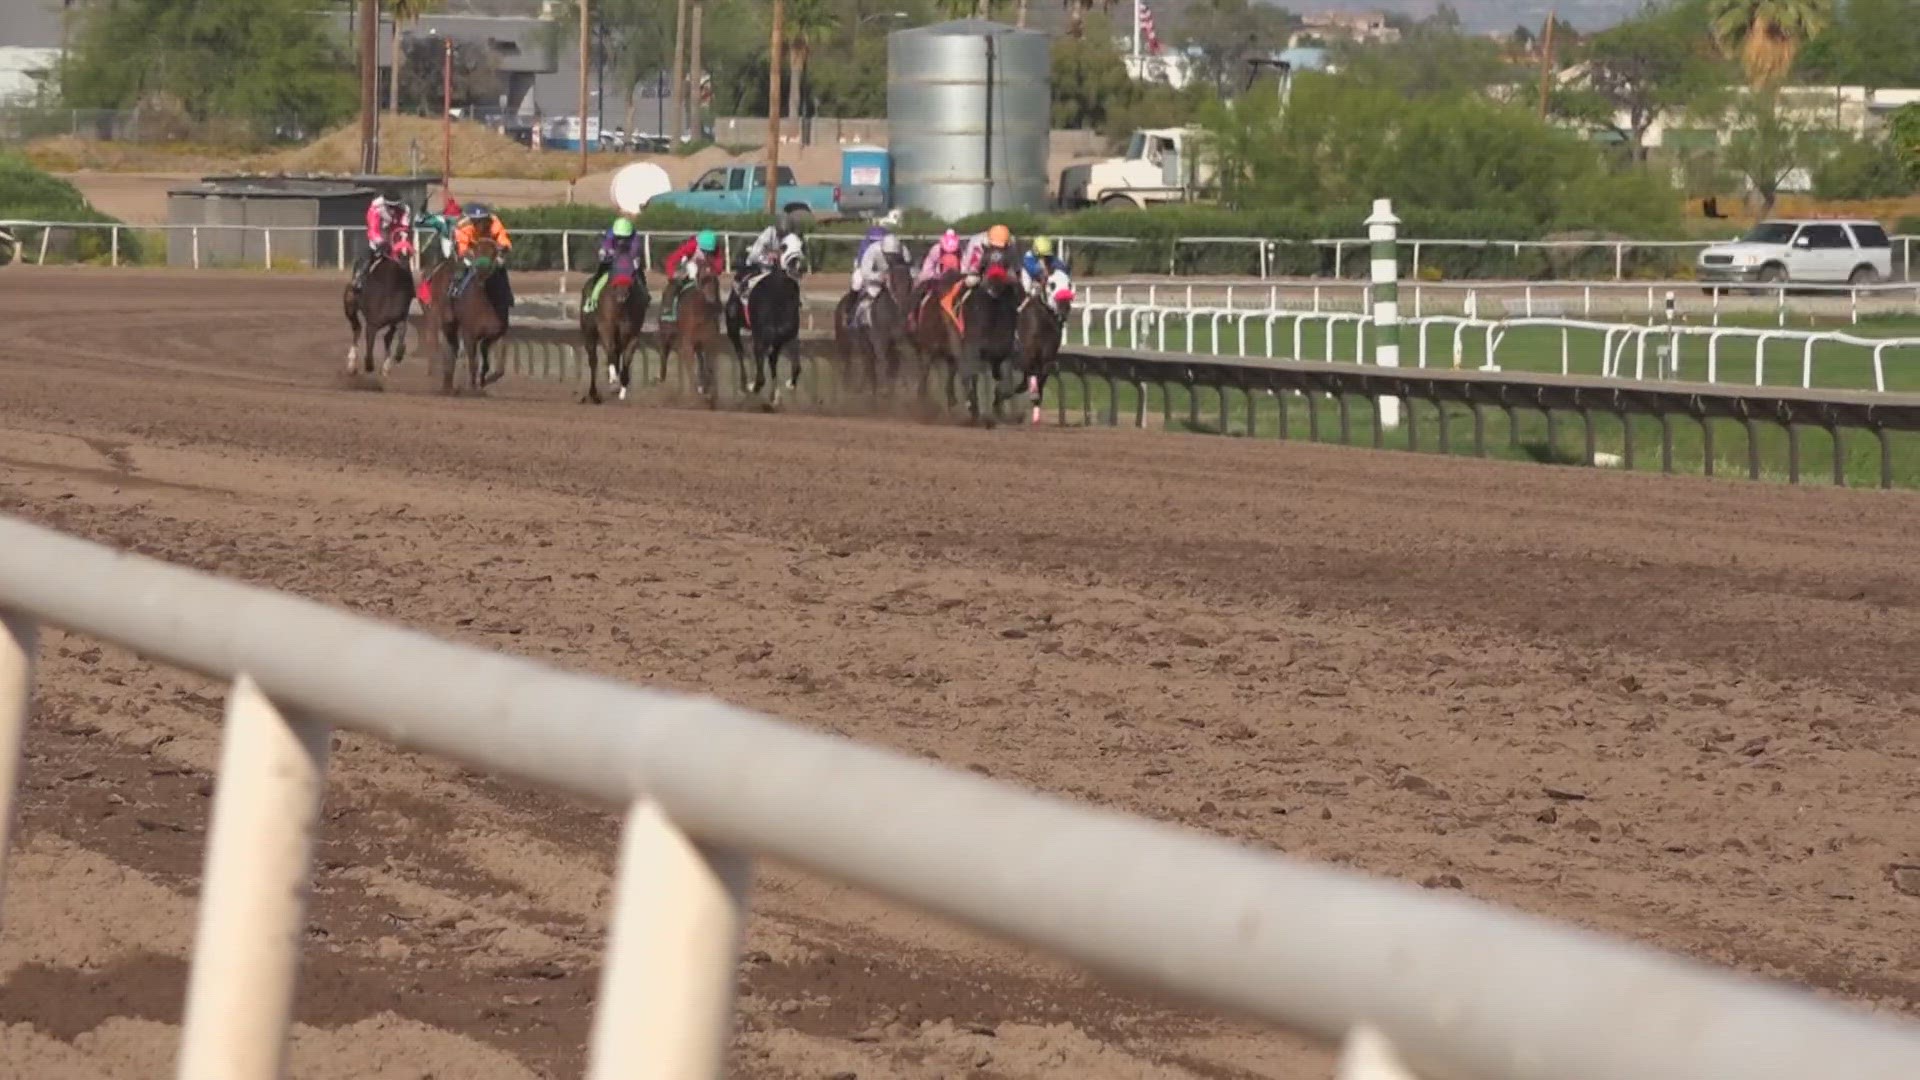 As of Oct. 1, no more live racing or simulcasting will take place at Turf Paradise in Phoenix.